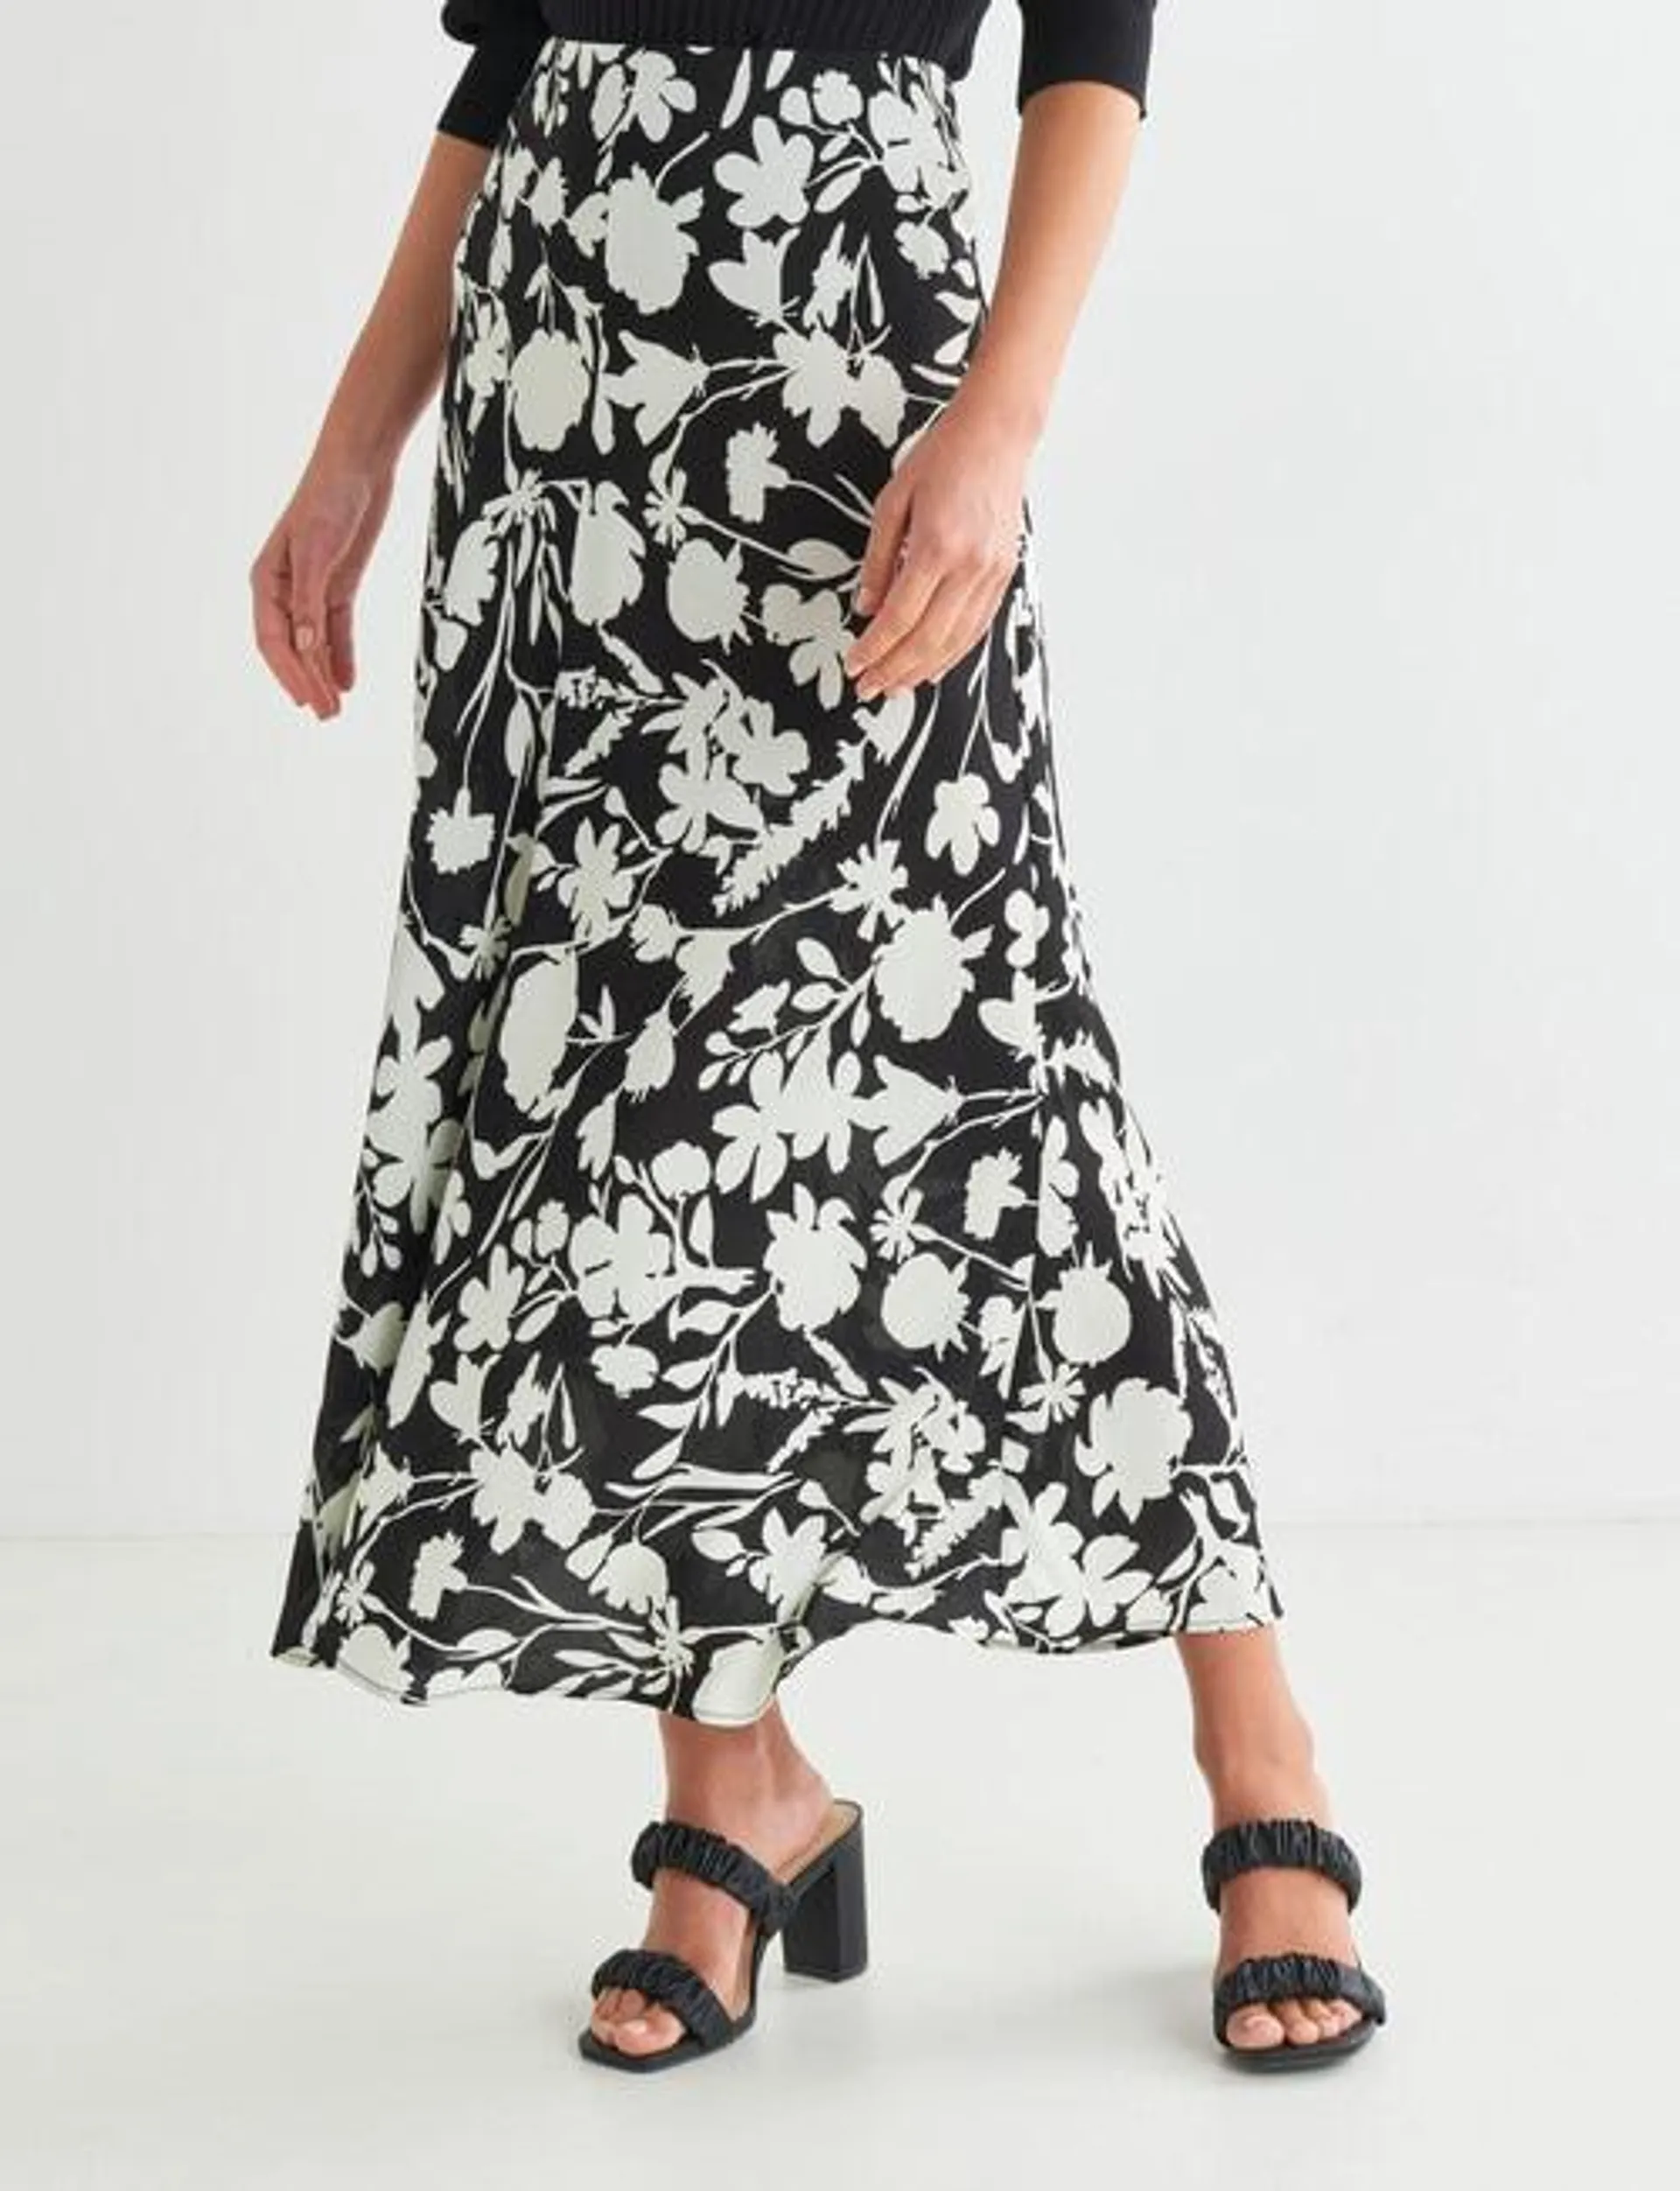 Whistle Floral Fit and Flare Midi Skirt Black & White